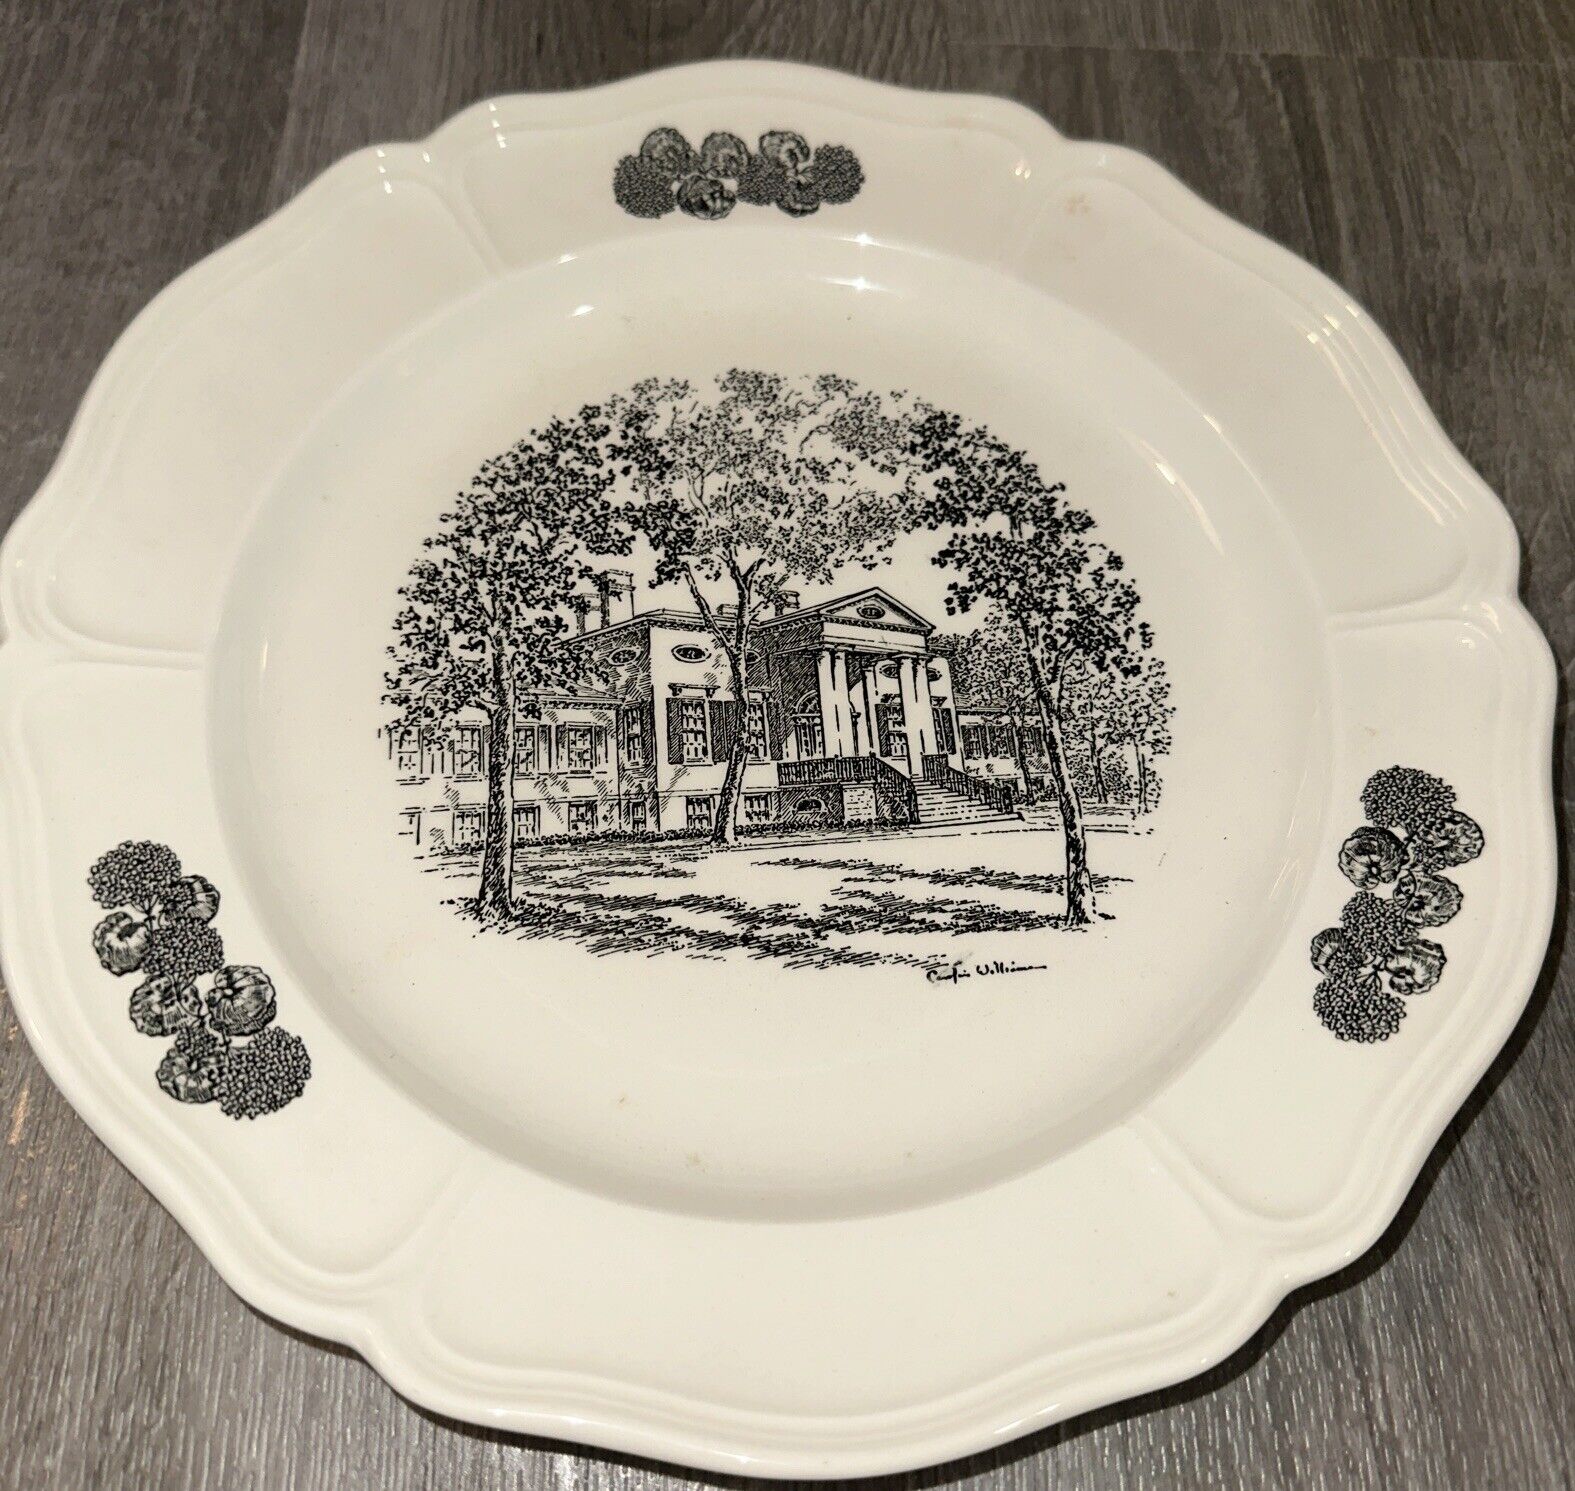 VTG 1982 CAROLINE WILLIAMS TAFT MUSEUM WEDGEWOOD COLLECTOR PLATE MADE IN ENGLAND